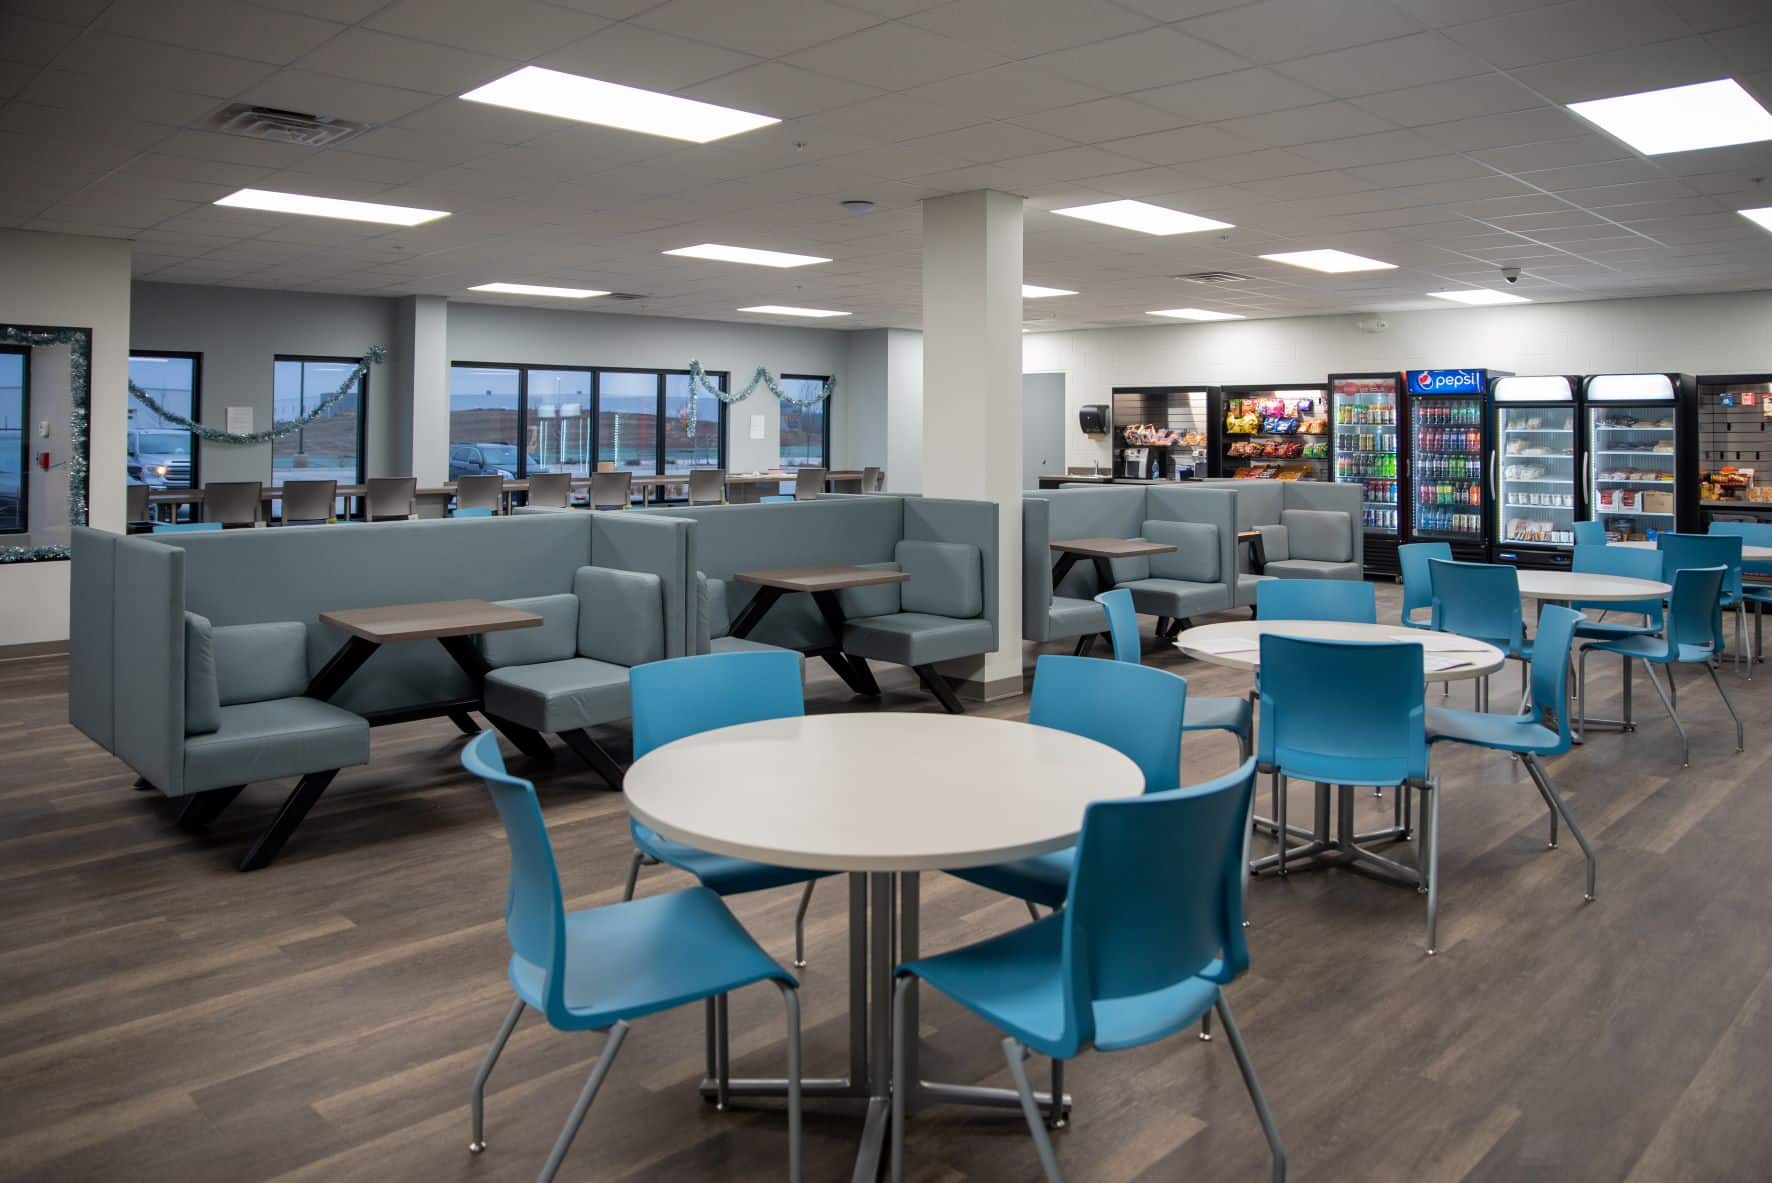 employee breakroom with vending machines, tables and chairs, and booth seating